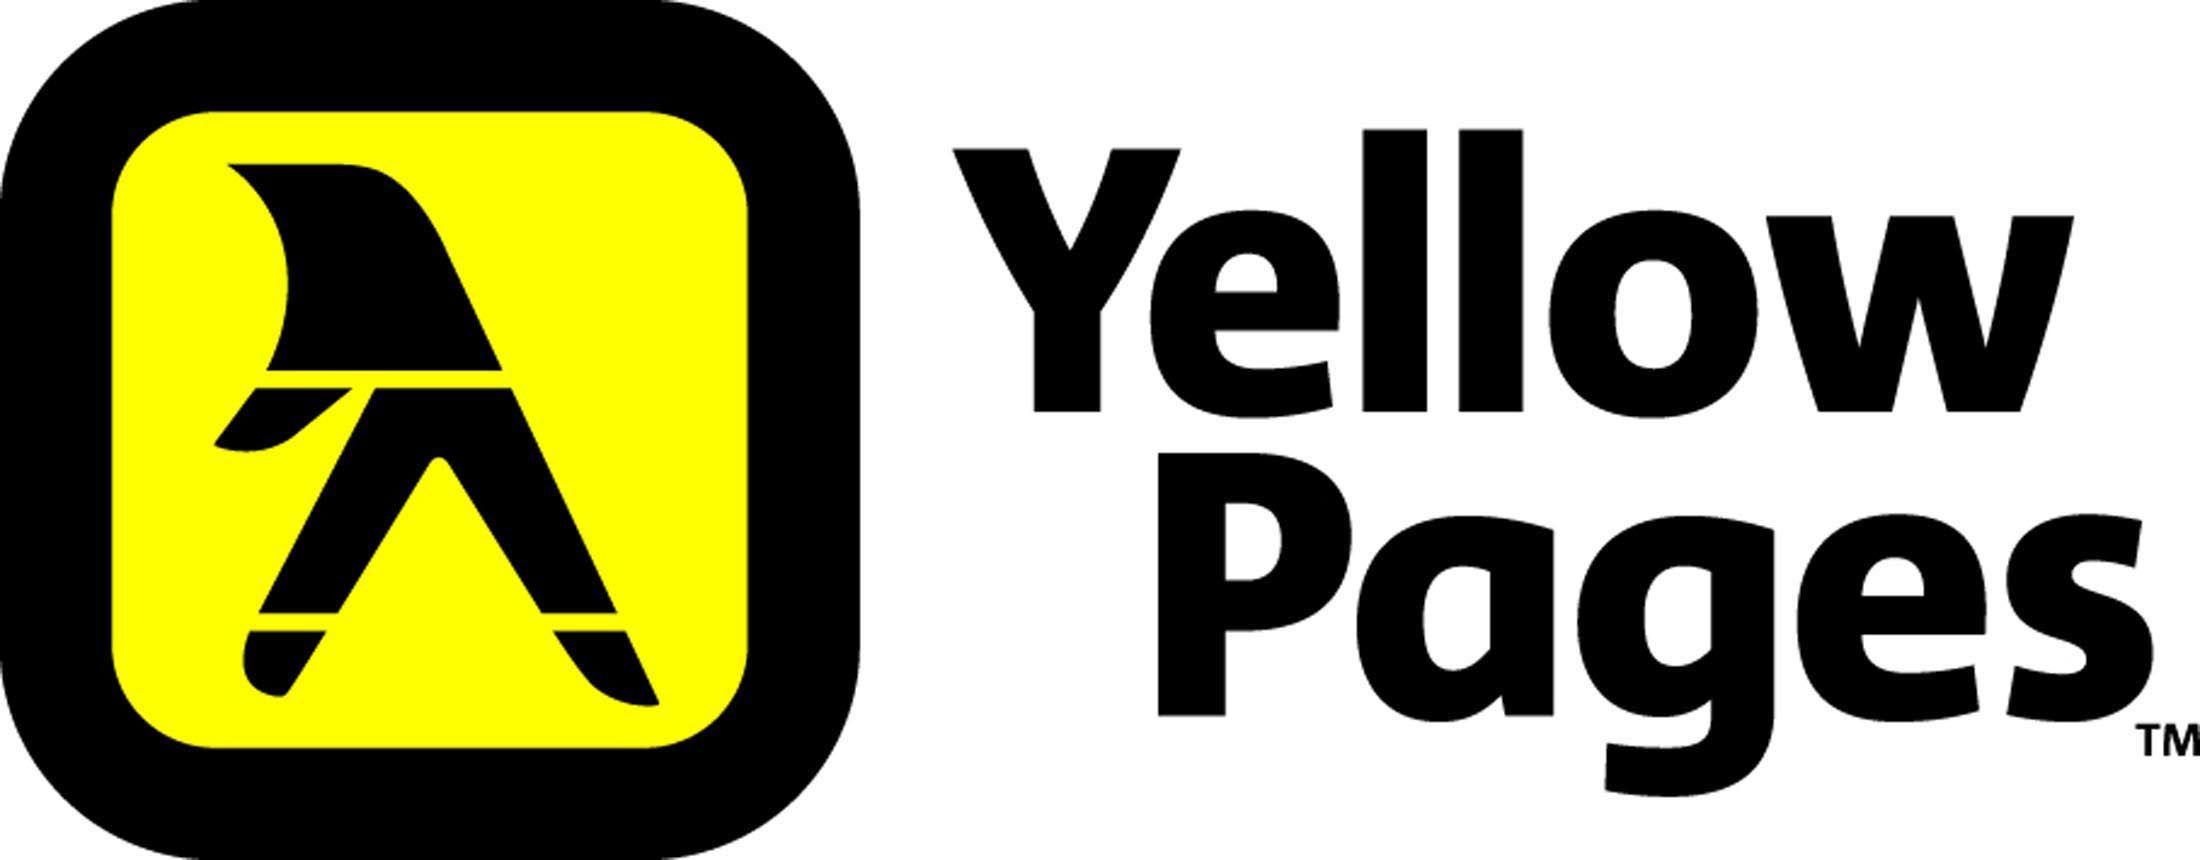 Yellow Pages Fingers Logo - Interact with Coastal Reign on YellowPages! | Misc. | Pinterest ...